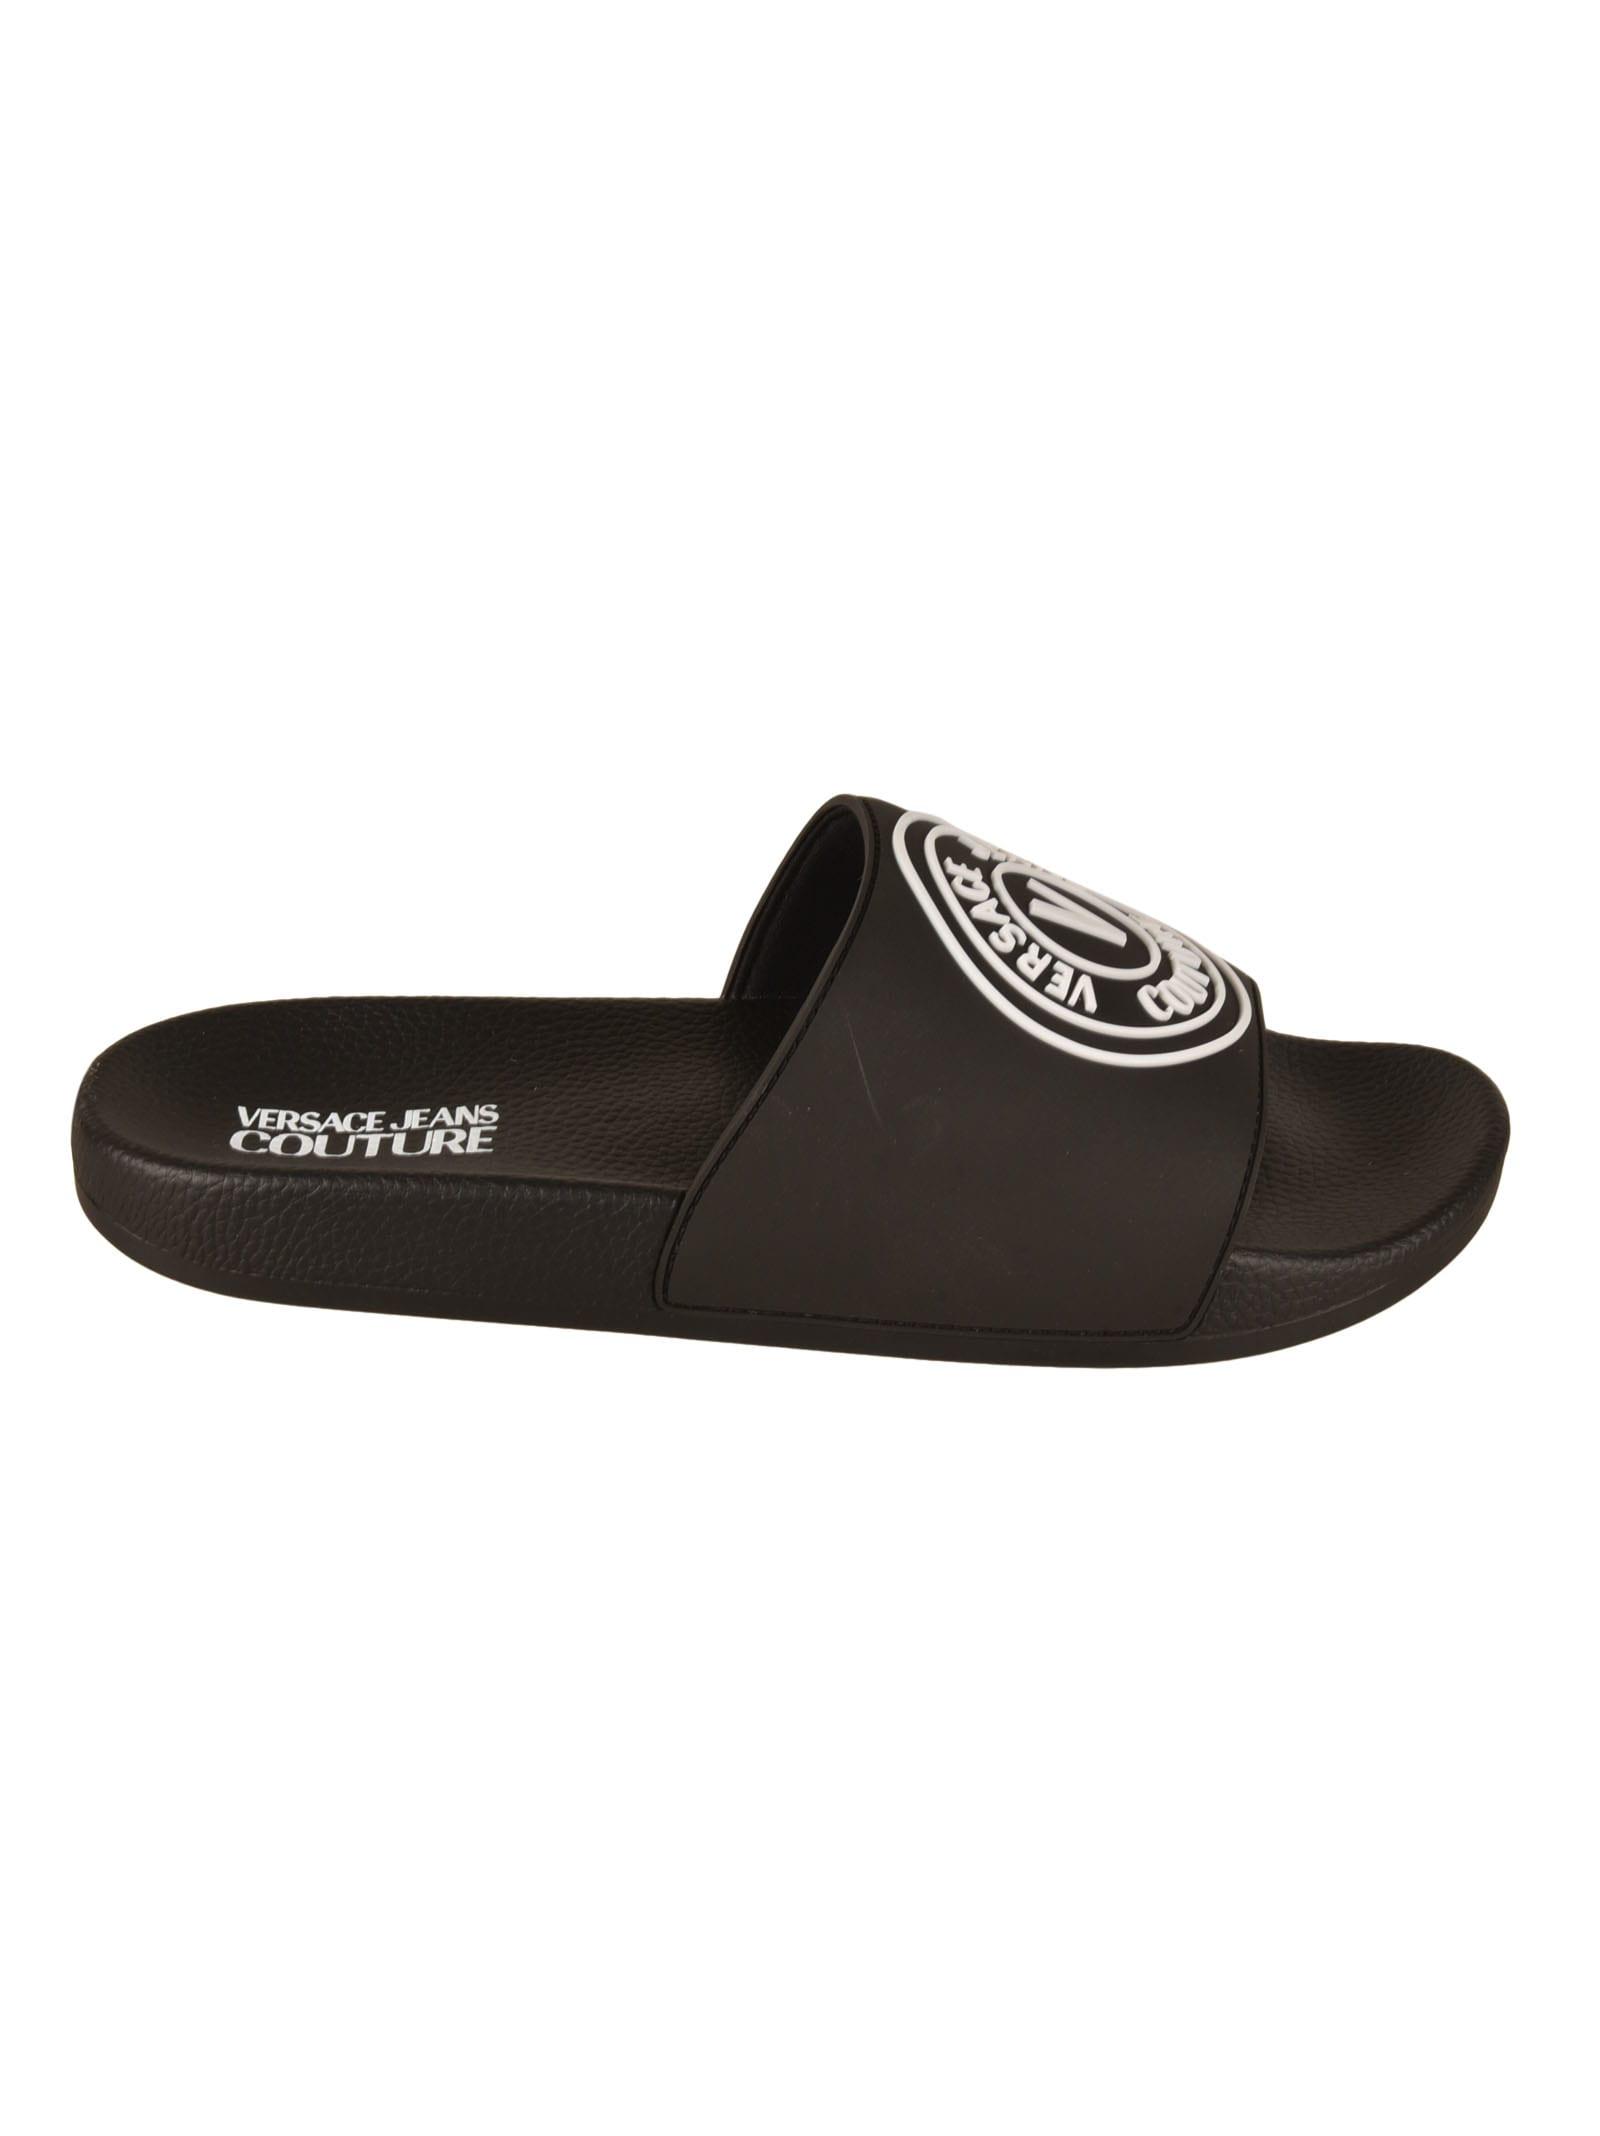 Versace Jeans Couture Logo Pool Sliders in Black for Men | Lyst